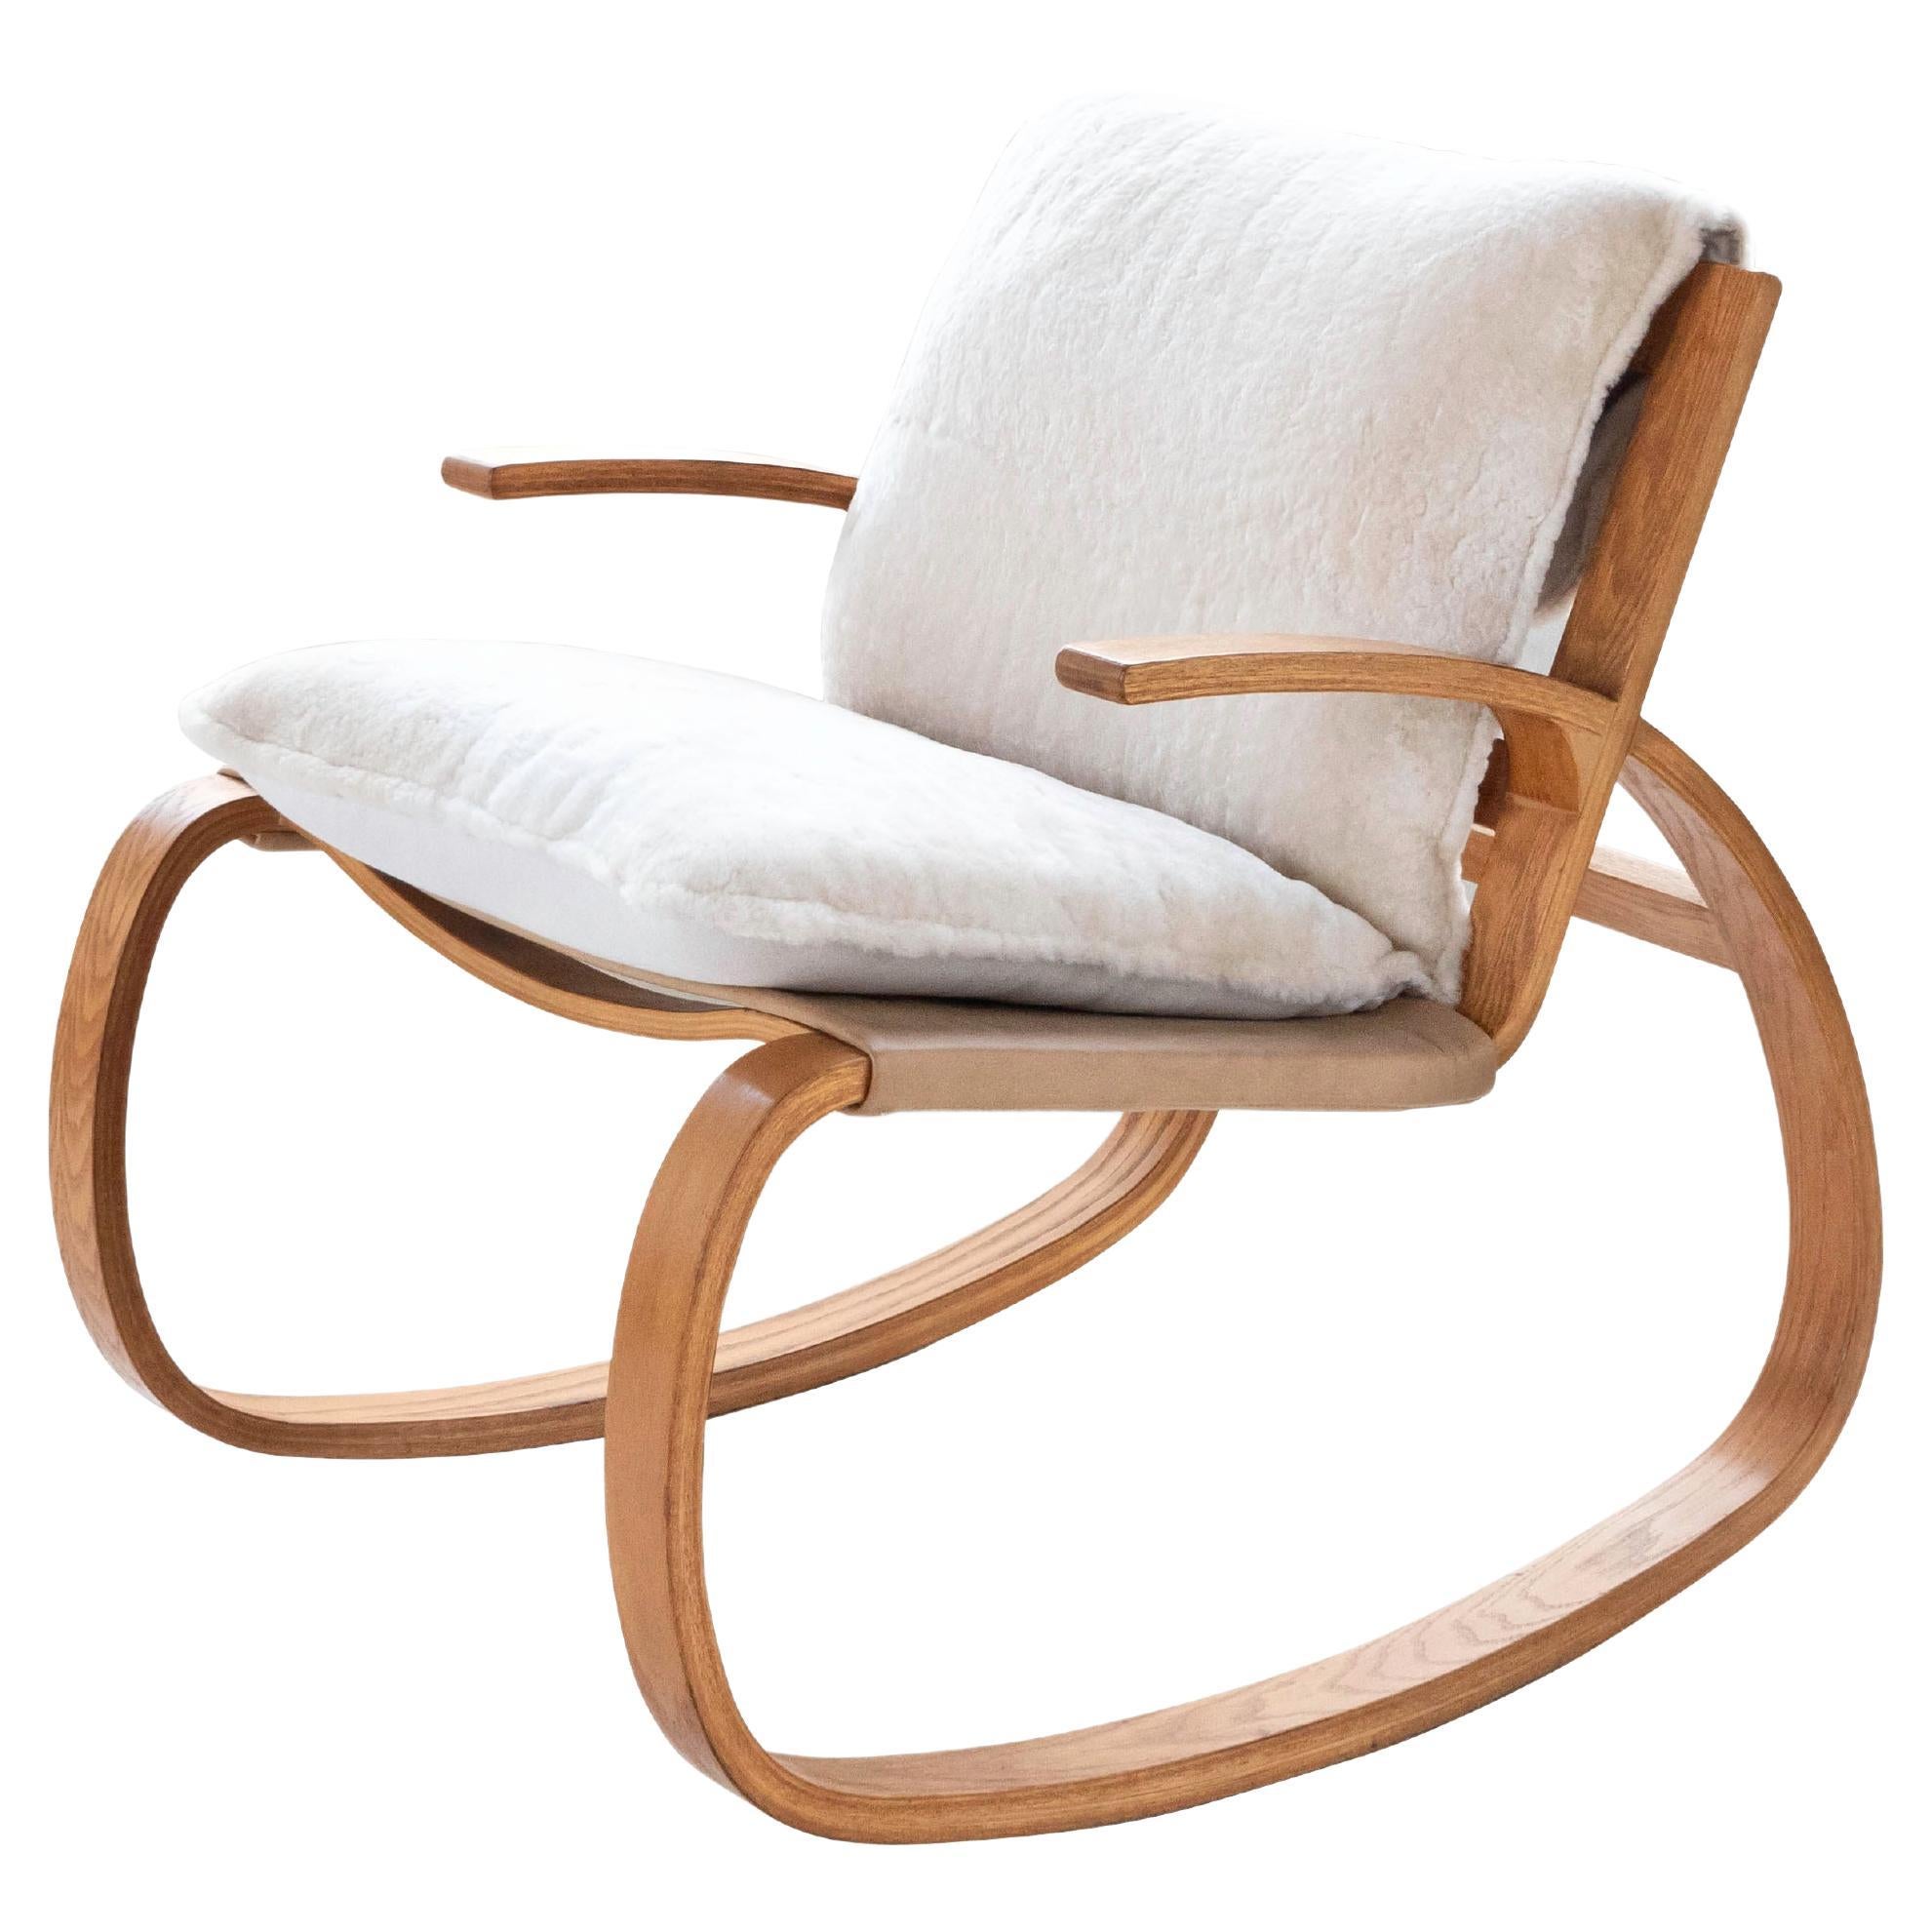 Oak Bentwood Sling Rocking Chair in Shearling by Plycraft, Circa 1970's For Sale